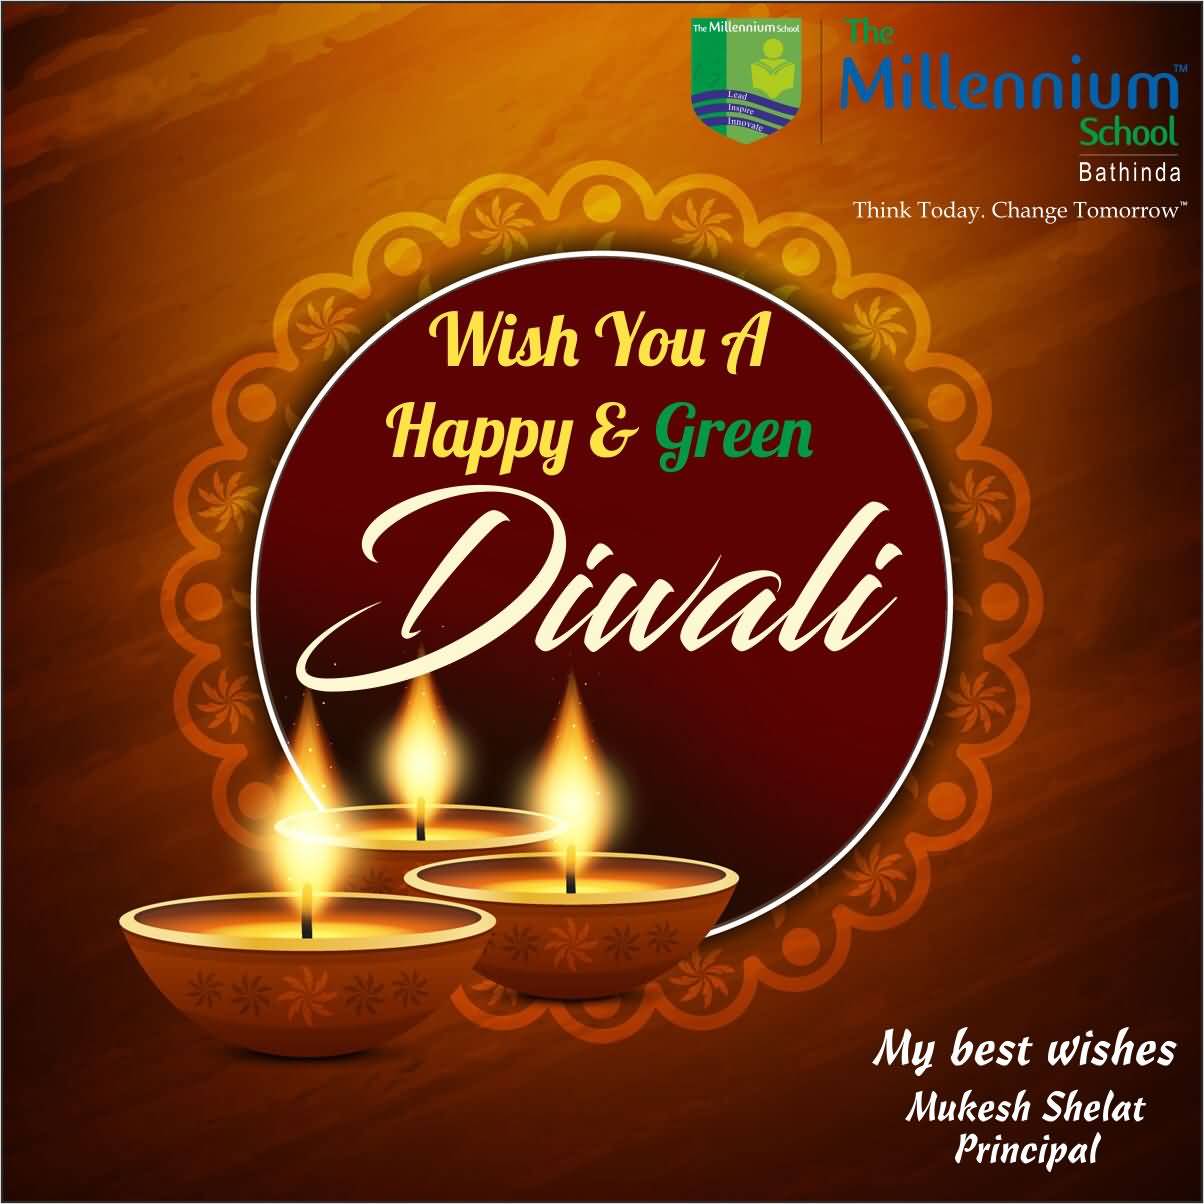 Wish You A Happy And Green Diwali Greetings